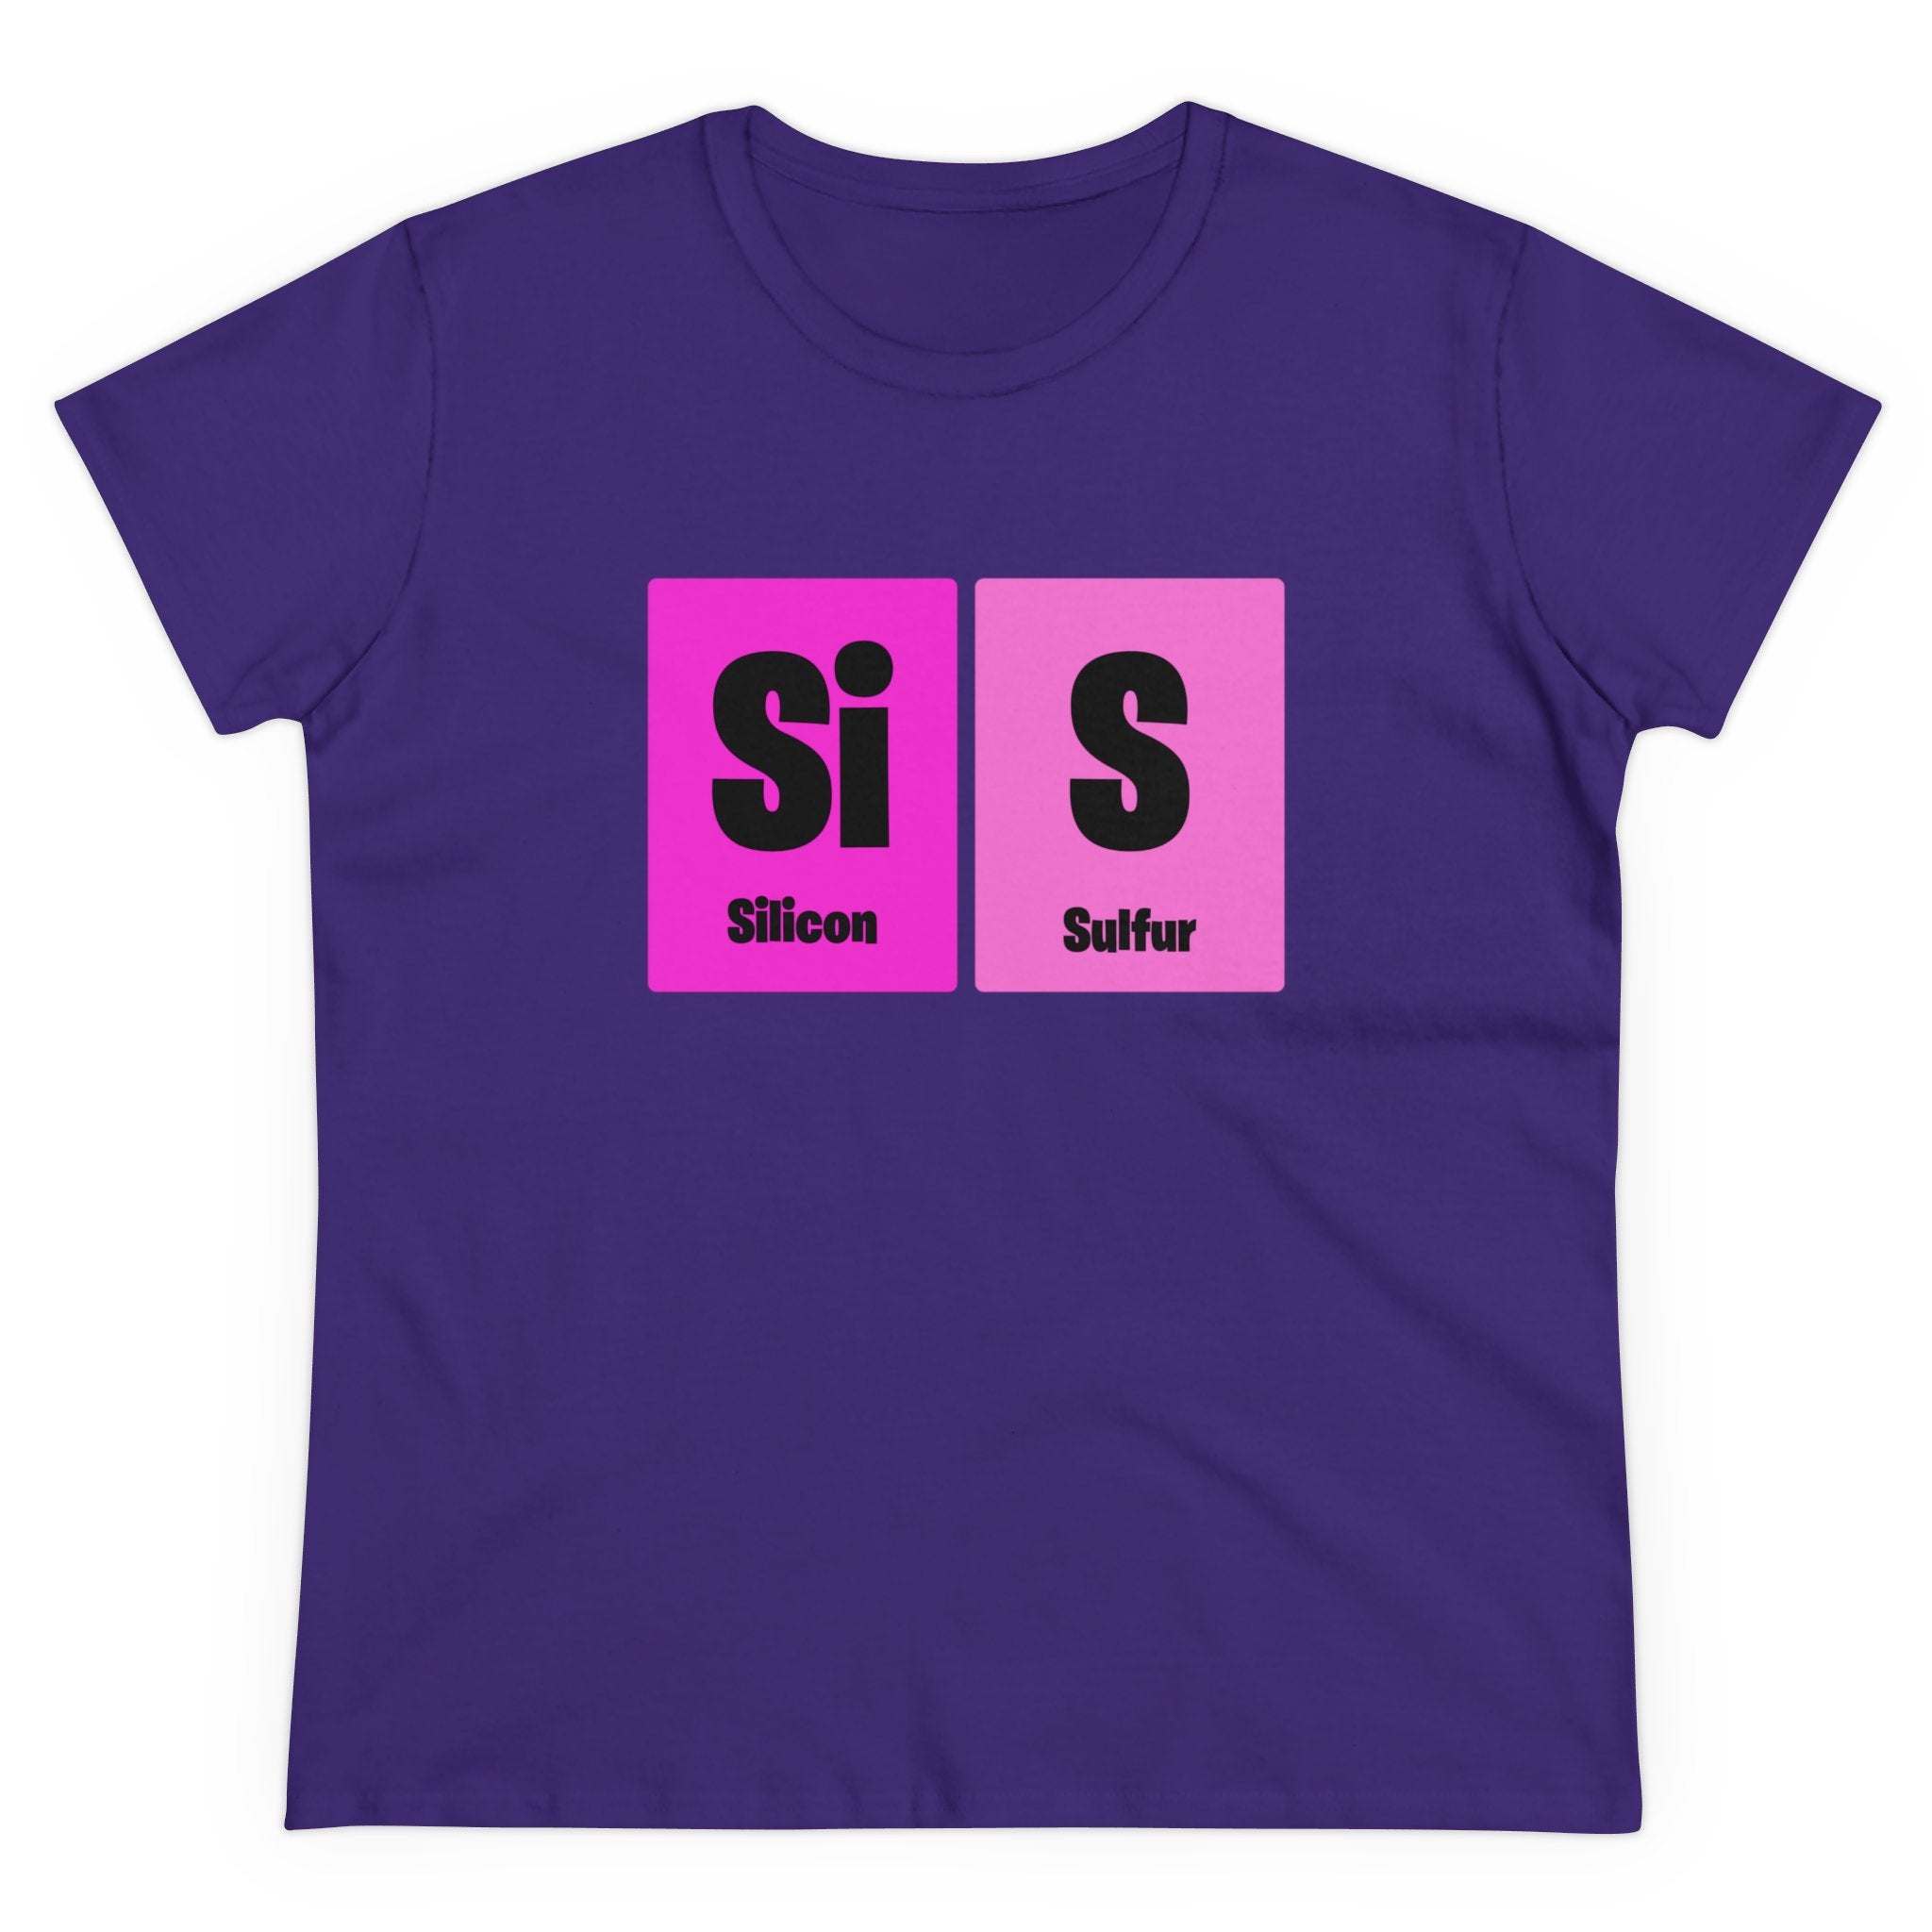 This Si-S Light Pendant - Women's Tee features a purple design with "Si" and "S" elements from the periodic table, representing Silicon and Sulfur, adding a touch of cozy fashion to your wardrobe.